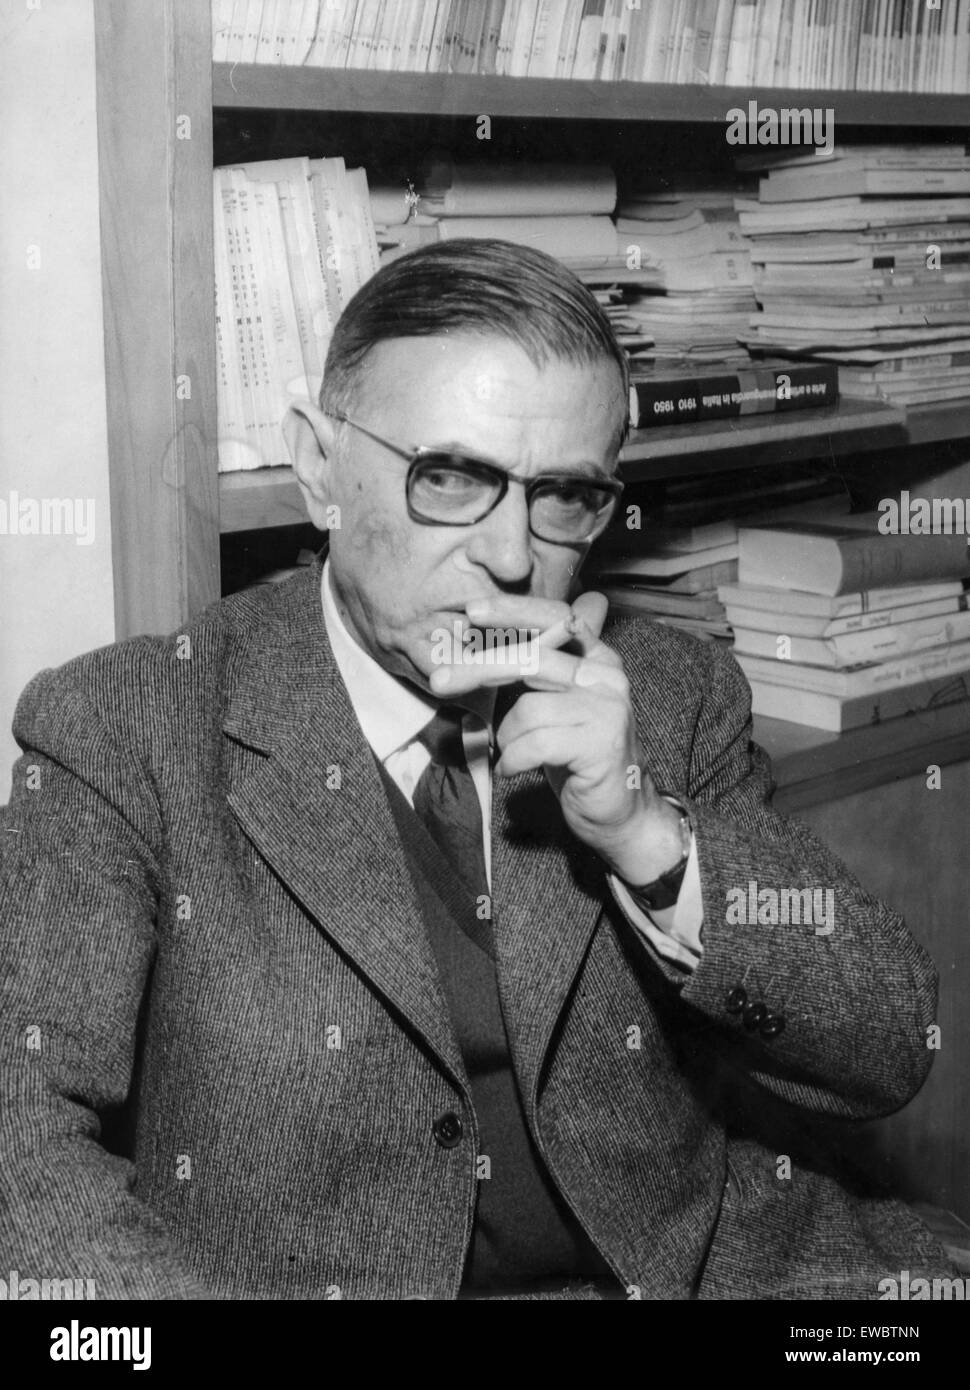 Jean Paul Sartre High Resolution Stock Photography and ...